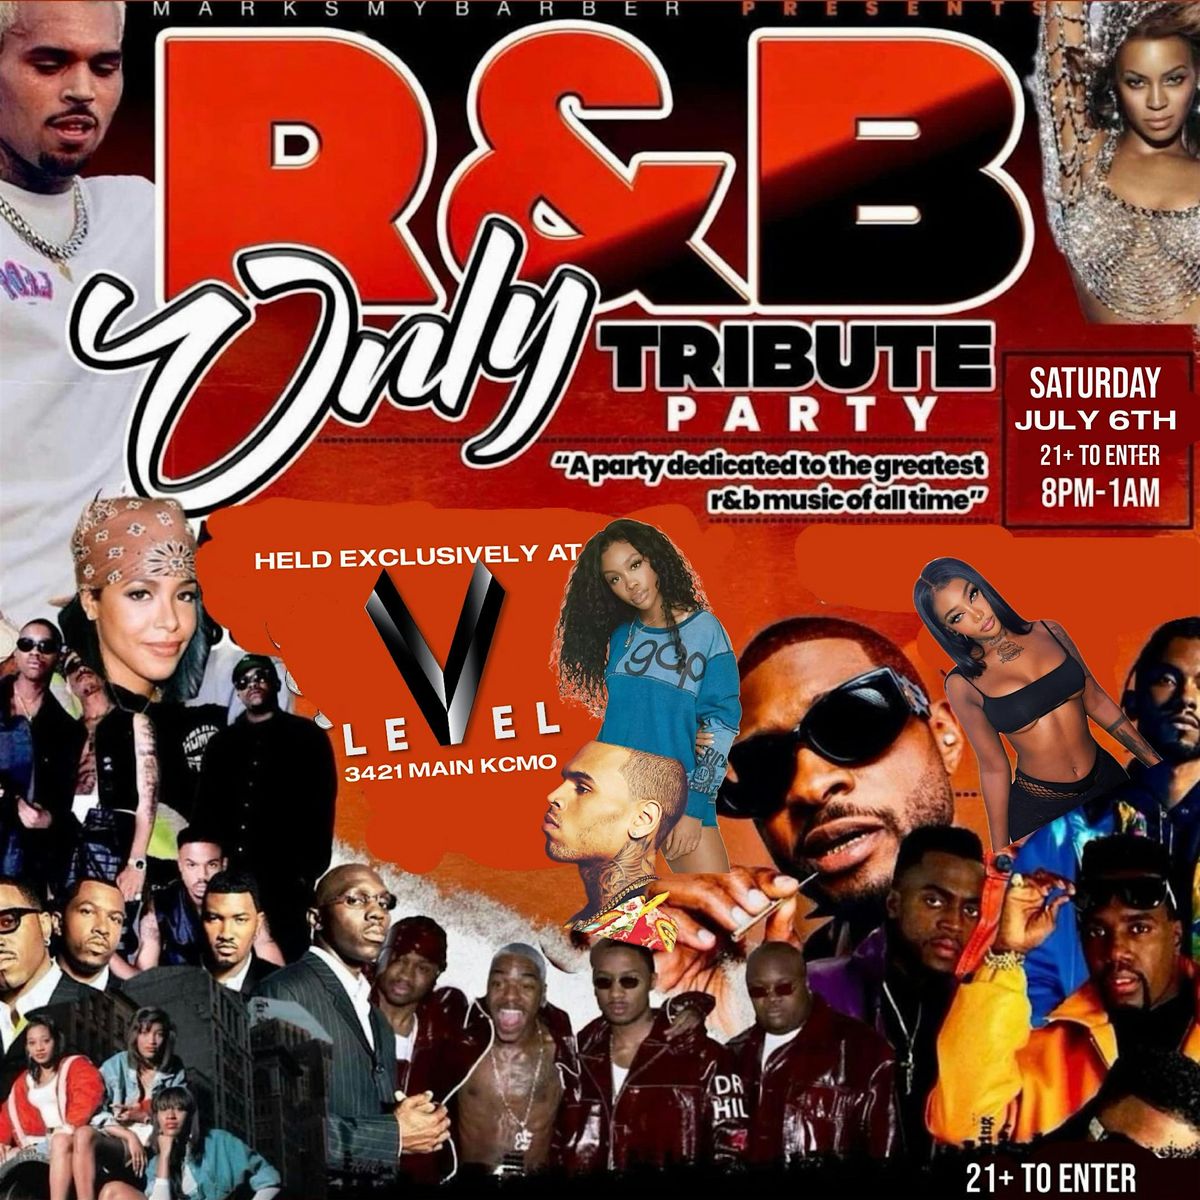 R&B ONLY TRIBUTE PARTY